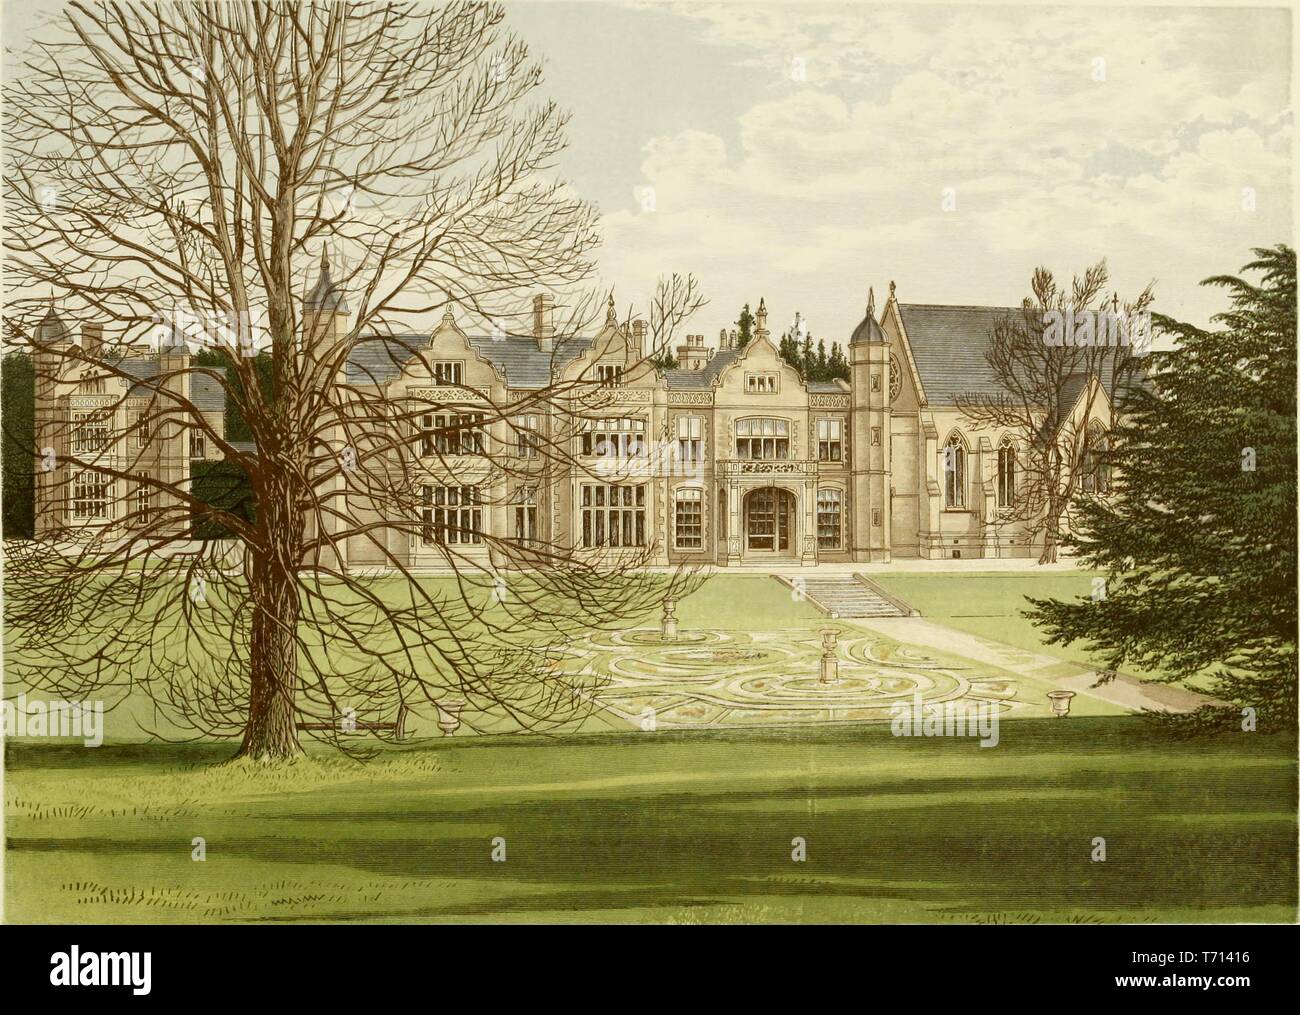 Color print depicting a formal garden leading to Exton Hall, a 19th-century country house, with a brick facade and Jacobethan elements, located in Rutland, England, published in FO (Francis Orpen) Morris's 'A series of picturesque views of seats of the noblemen and gentlemen of Great Britain and Ireland, with descriptive and historical letterpress', 1840. Courtesy Internet Archive. () Stock Photo